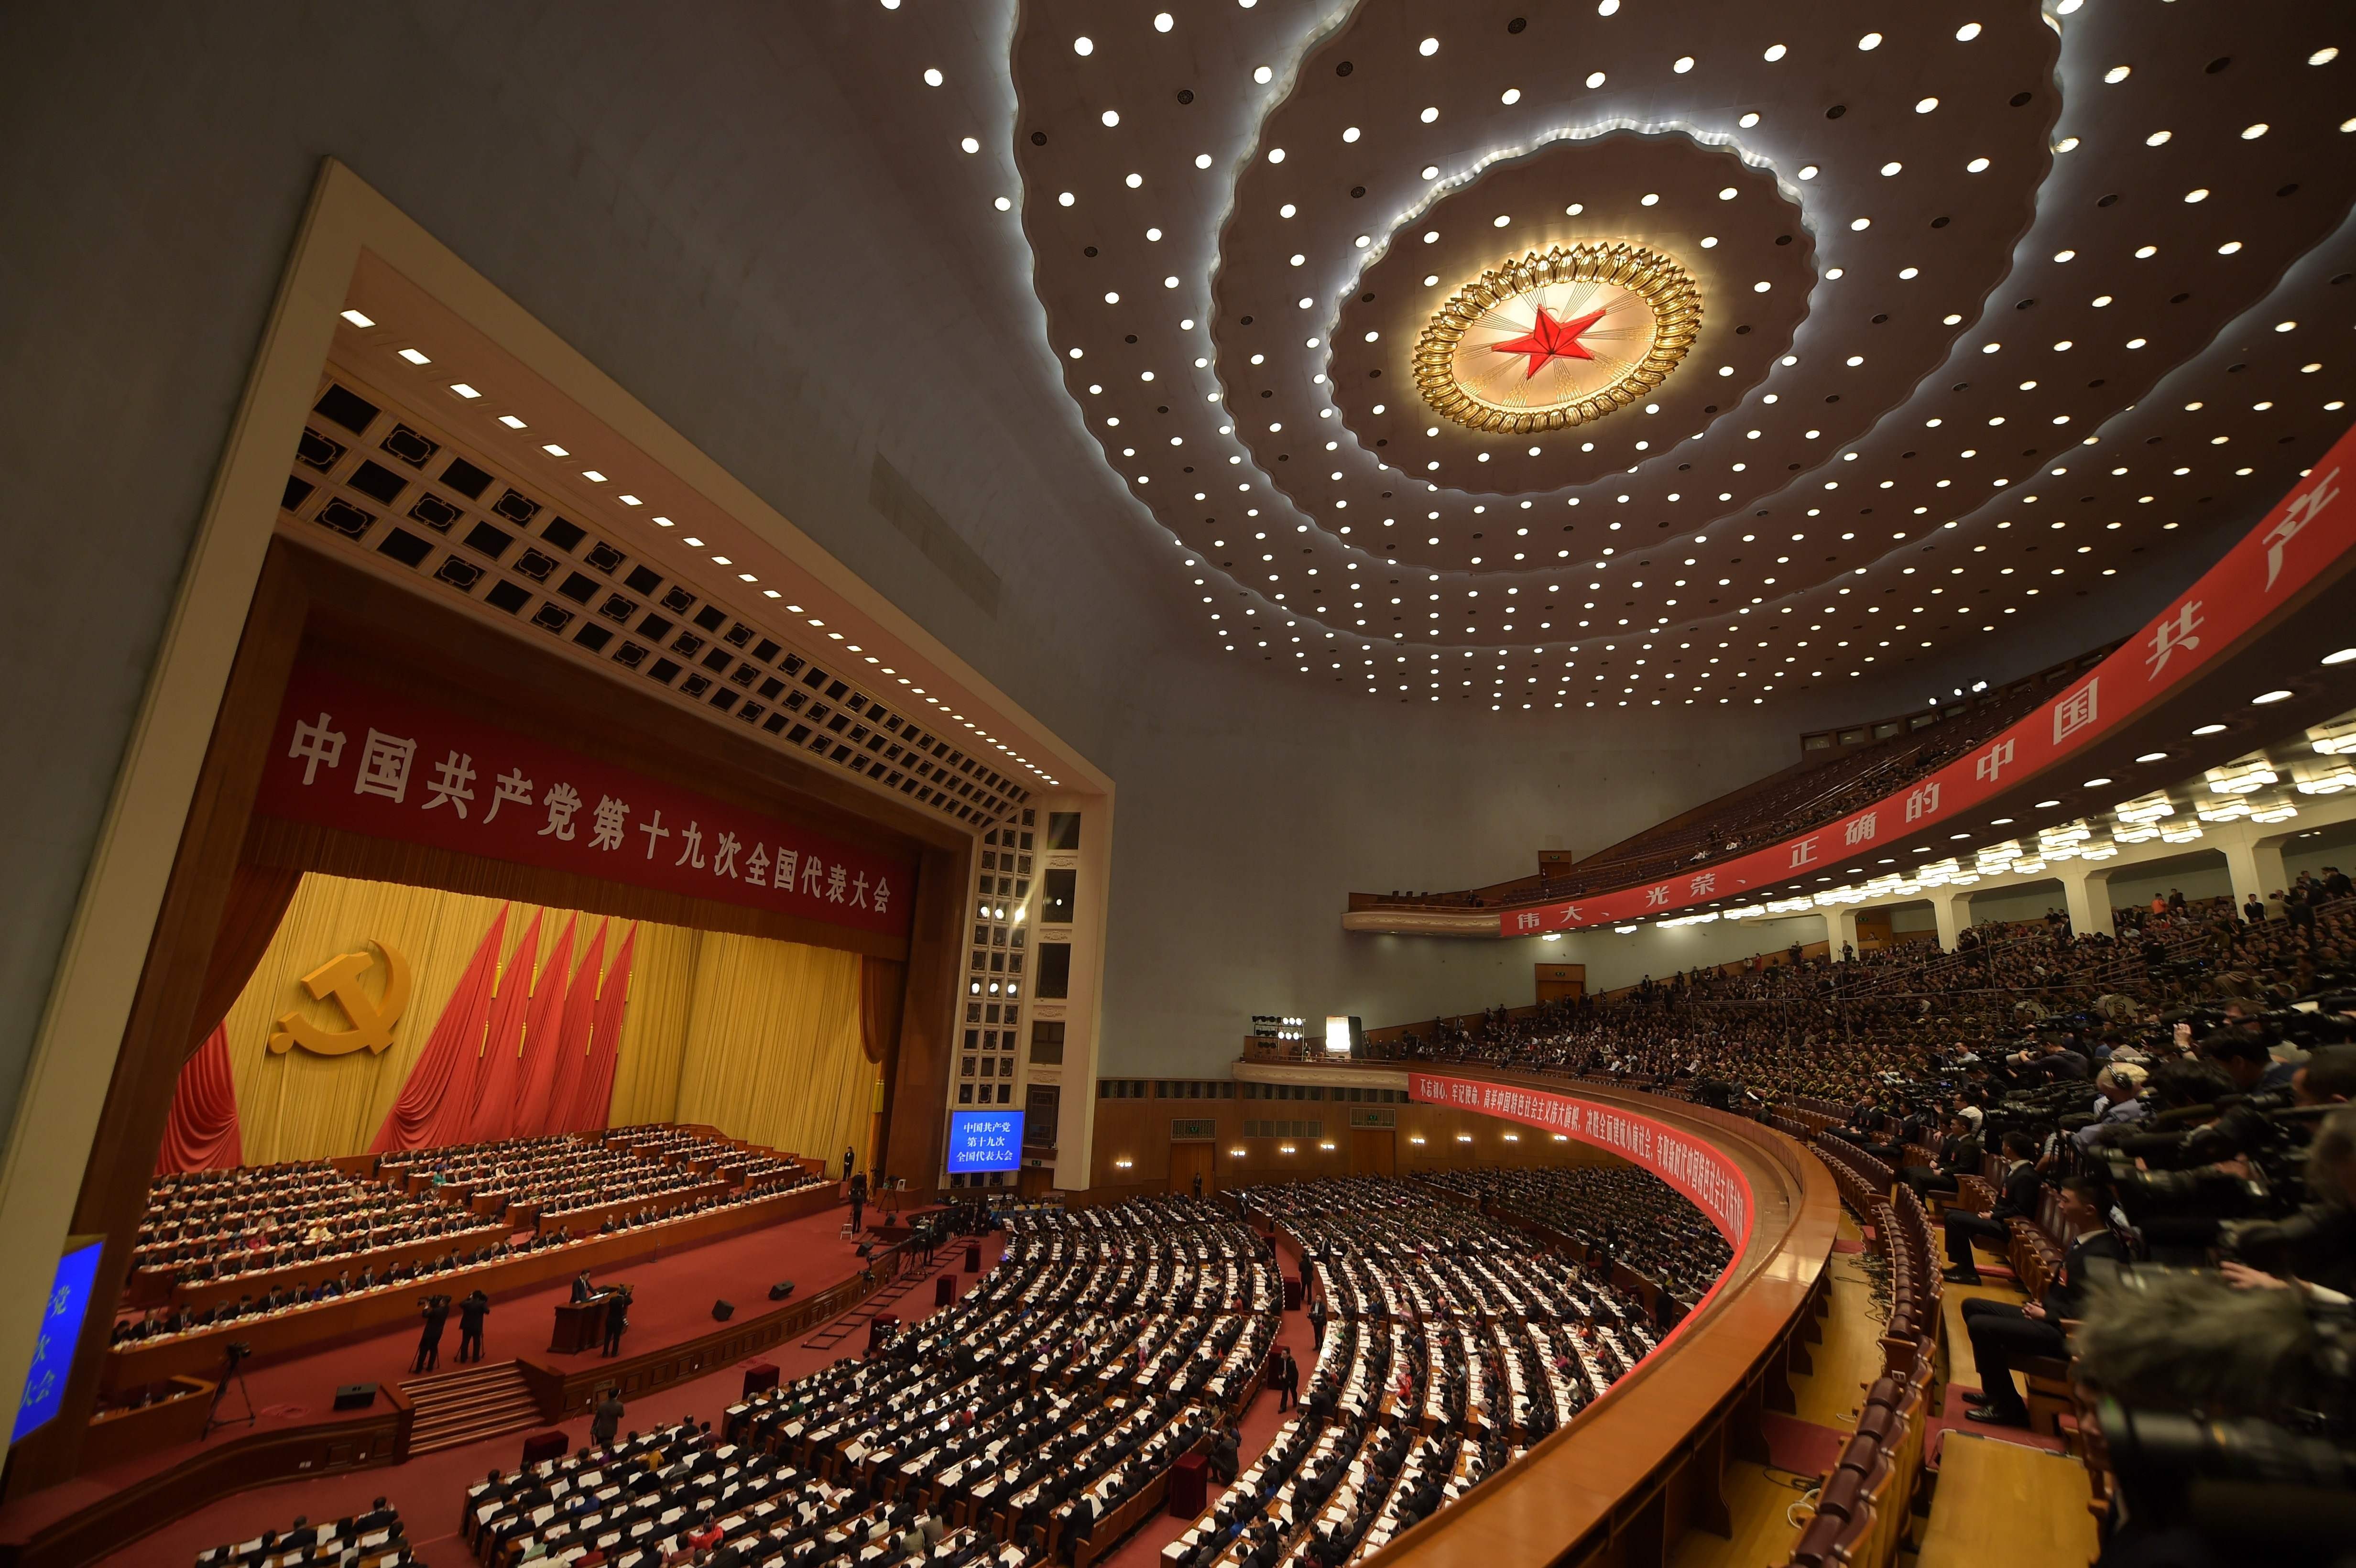 President Xi vows to uphold party leadership, deepen economic reform and develop China’s global influence by 2050